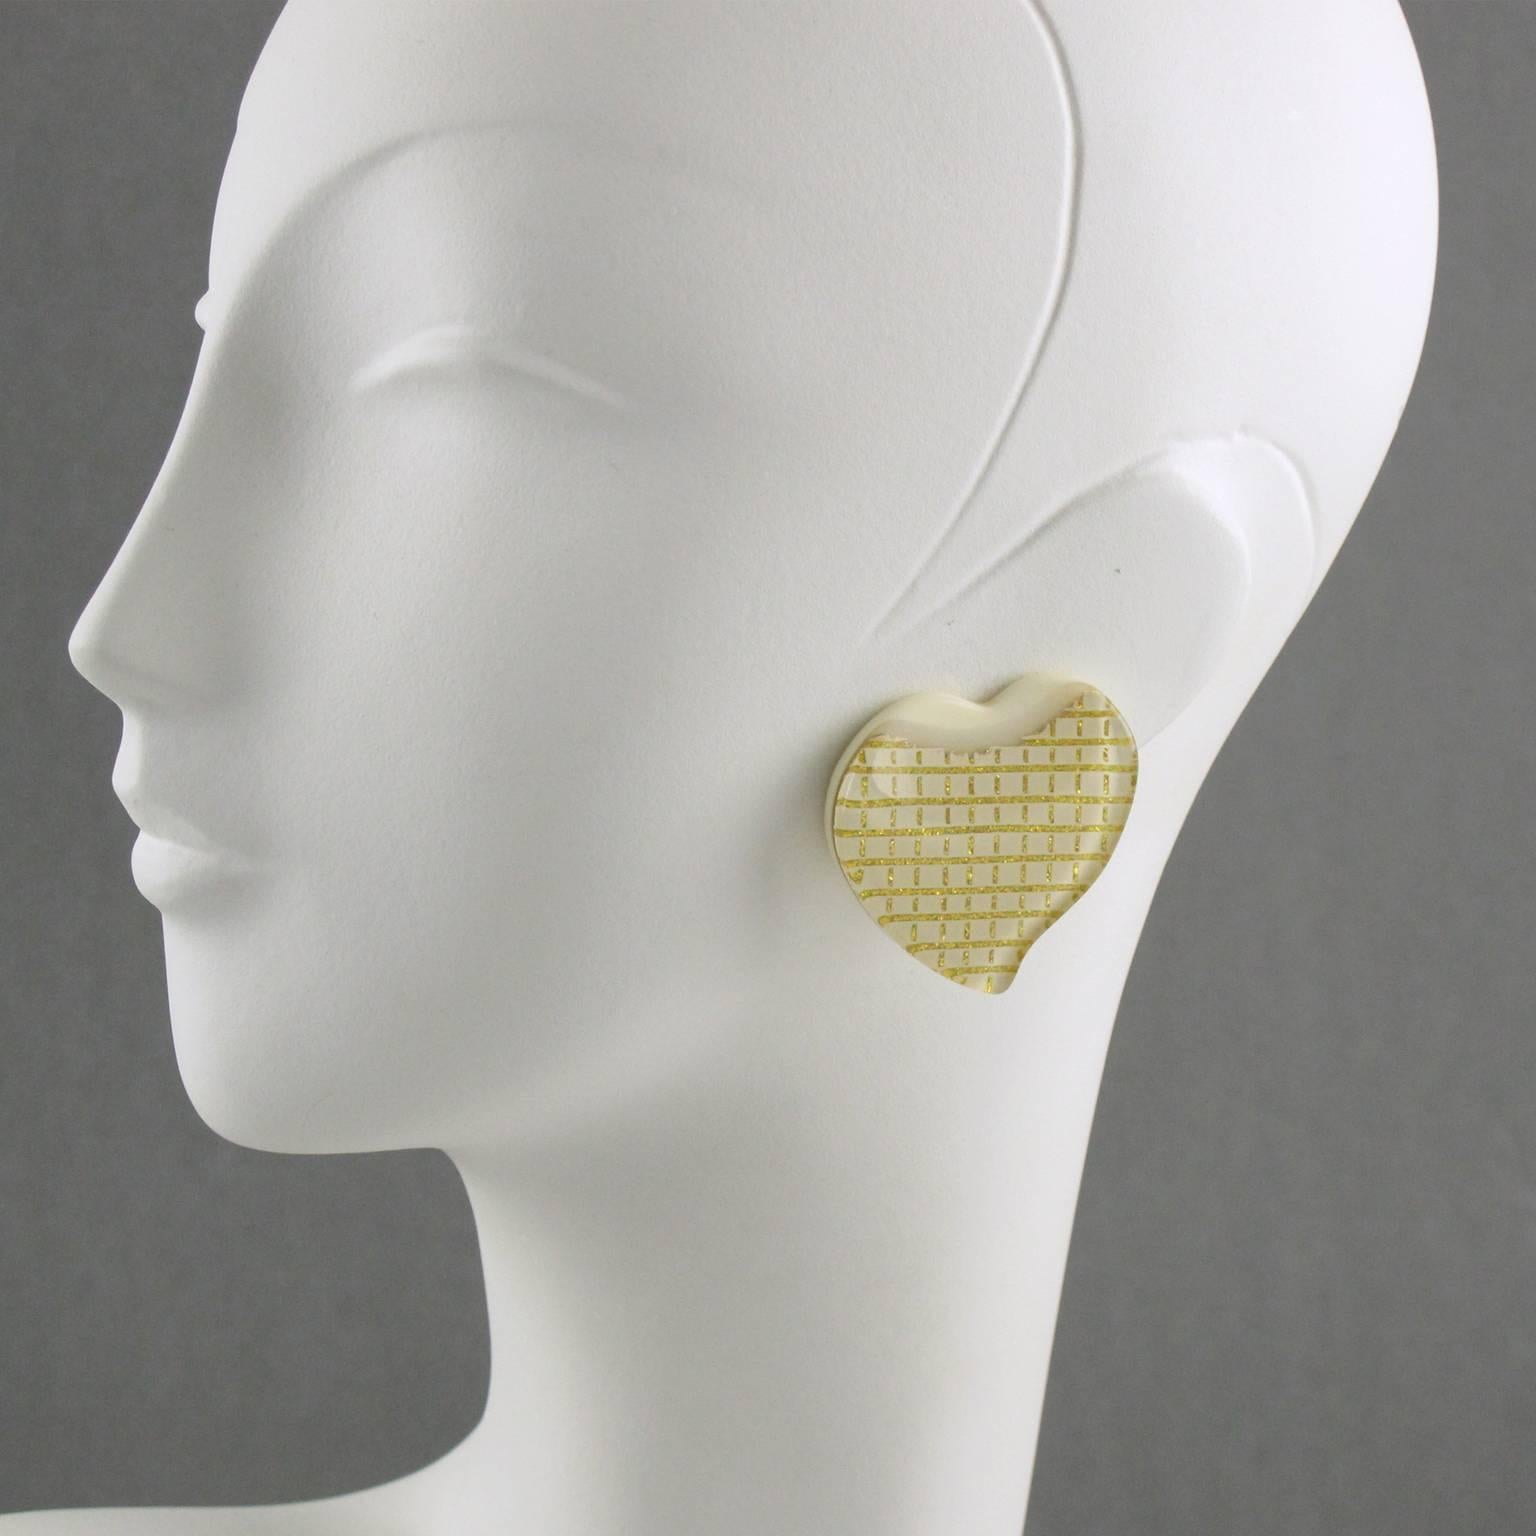 Vintage 1960s oversized Lucite clip on earrings. Large carved heart shape with lamination. Off-white color background with geometric gilt design. Excellent vintage condition.

Measurements: 1.57 in. wide (4 cm) x 1.57 in. high (4 cm)